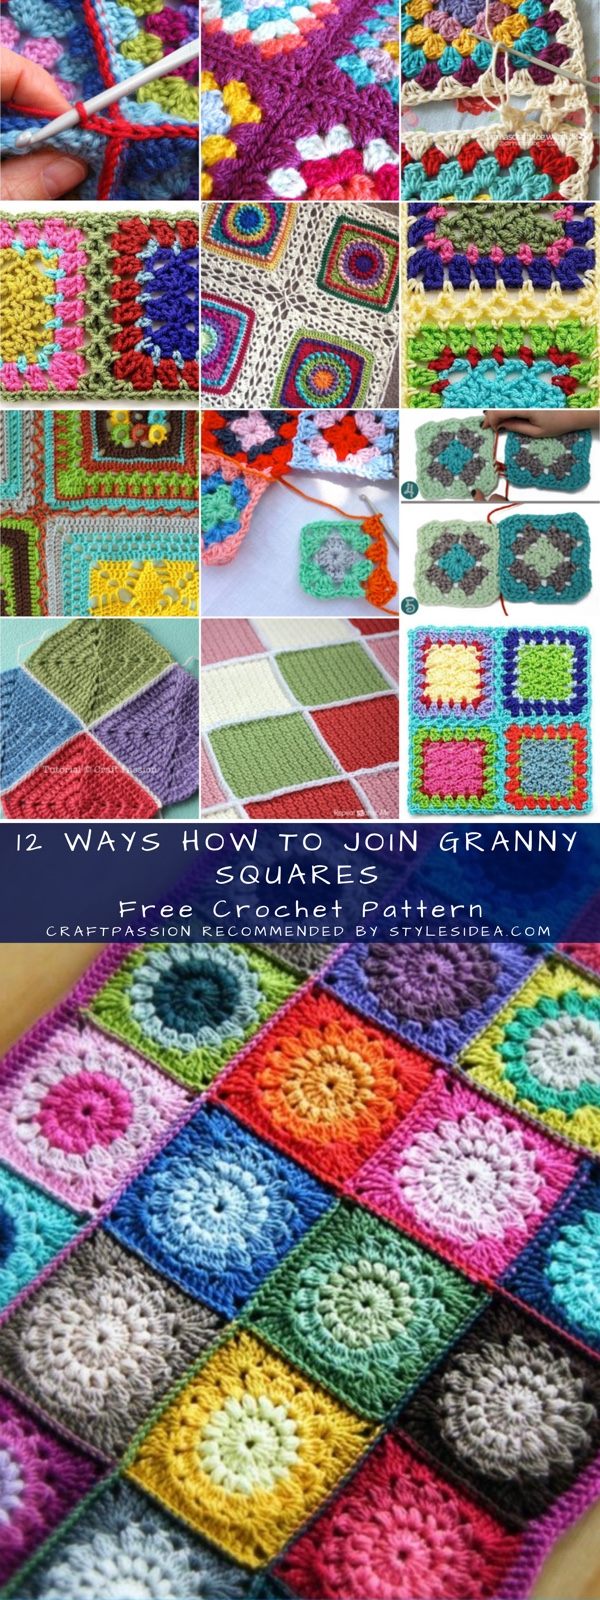 12 Granny Square Crochet Pattern 12 Ways How To Join Granny Squares Crochet Patterns Free Styles Idea